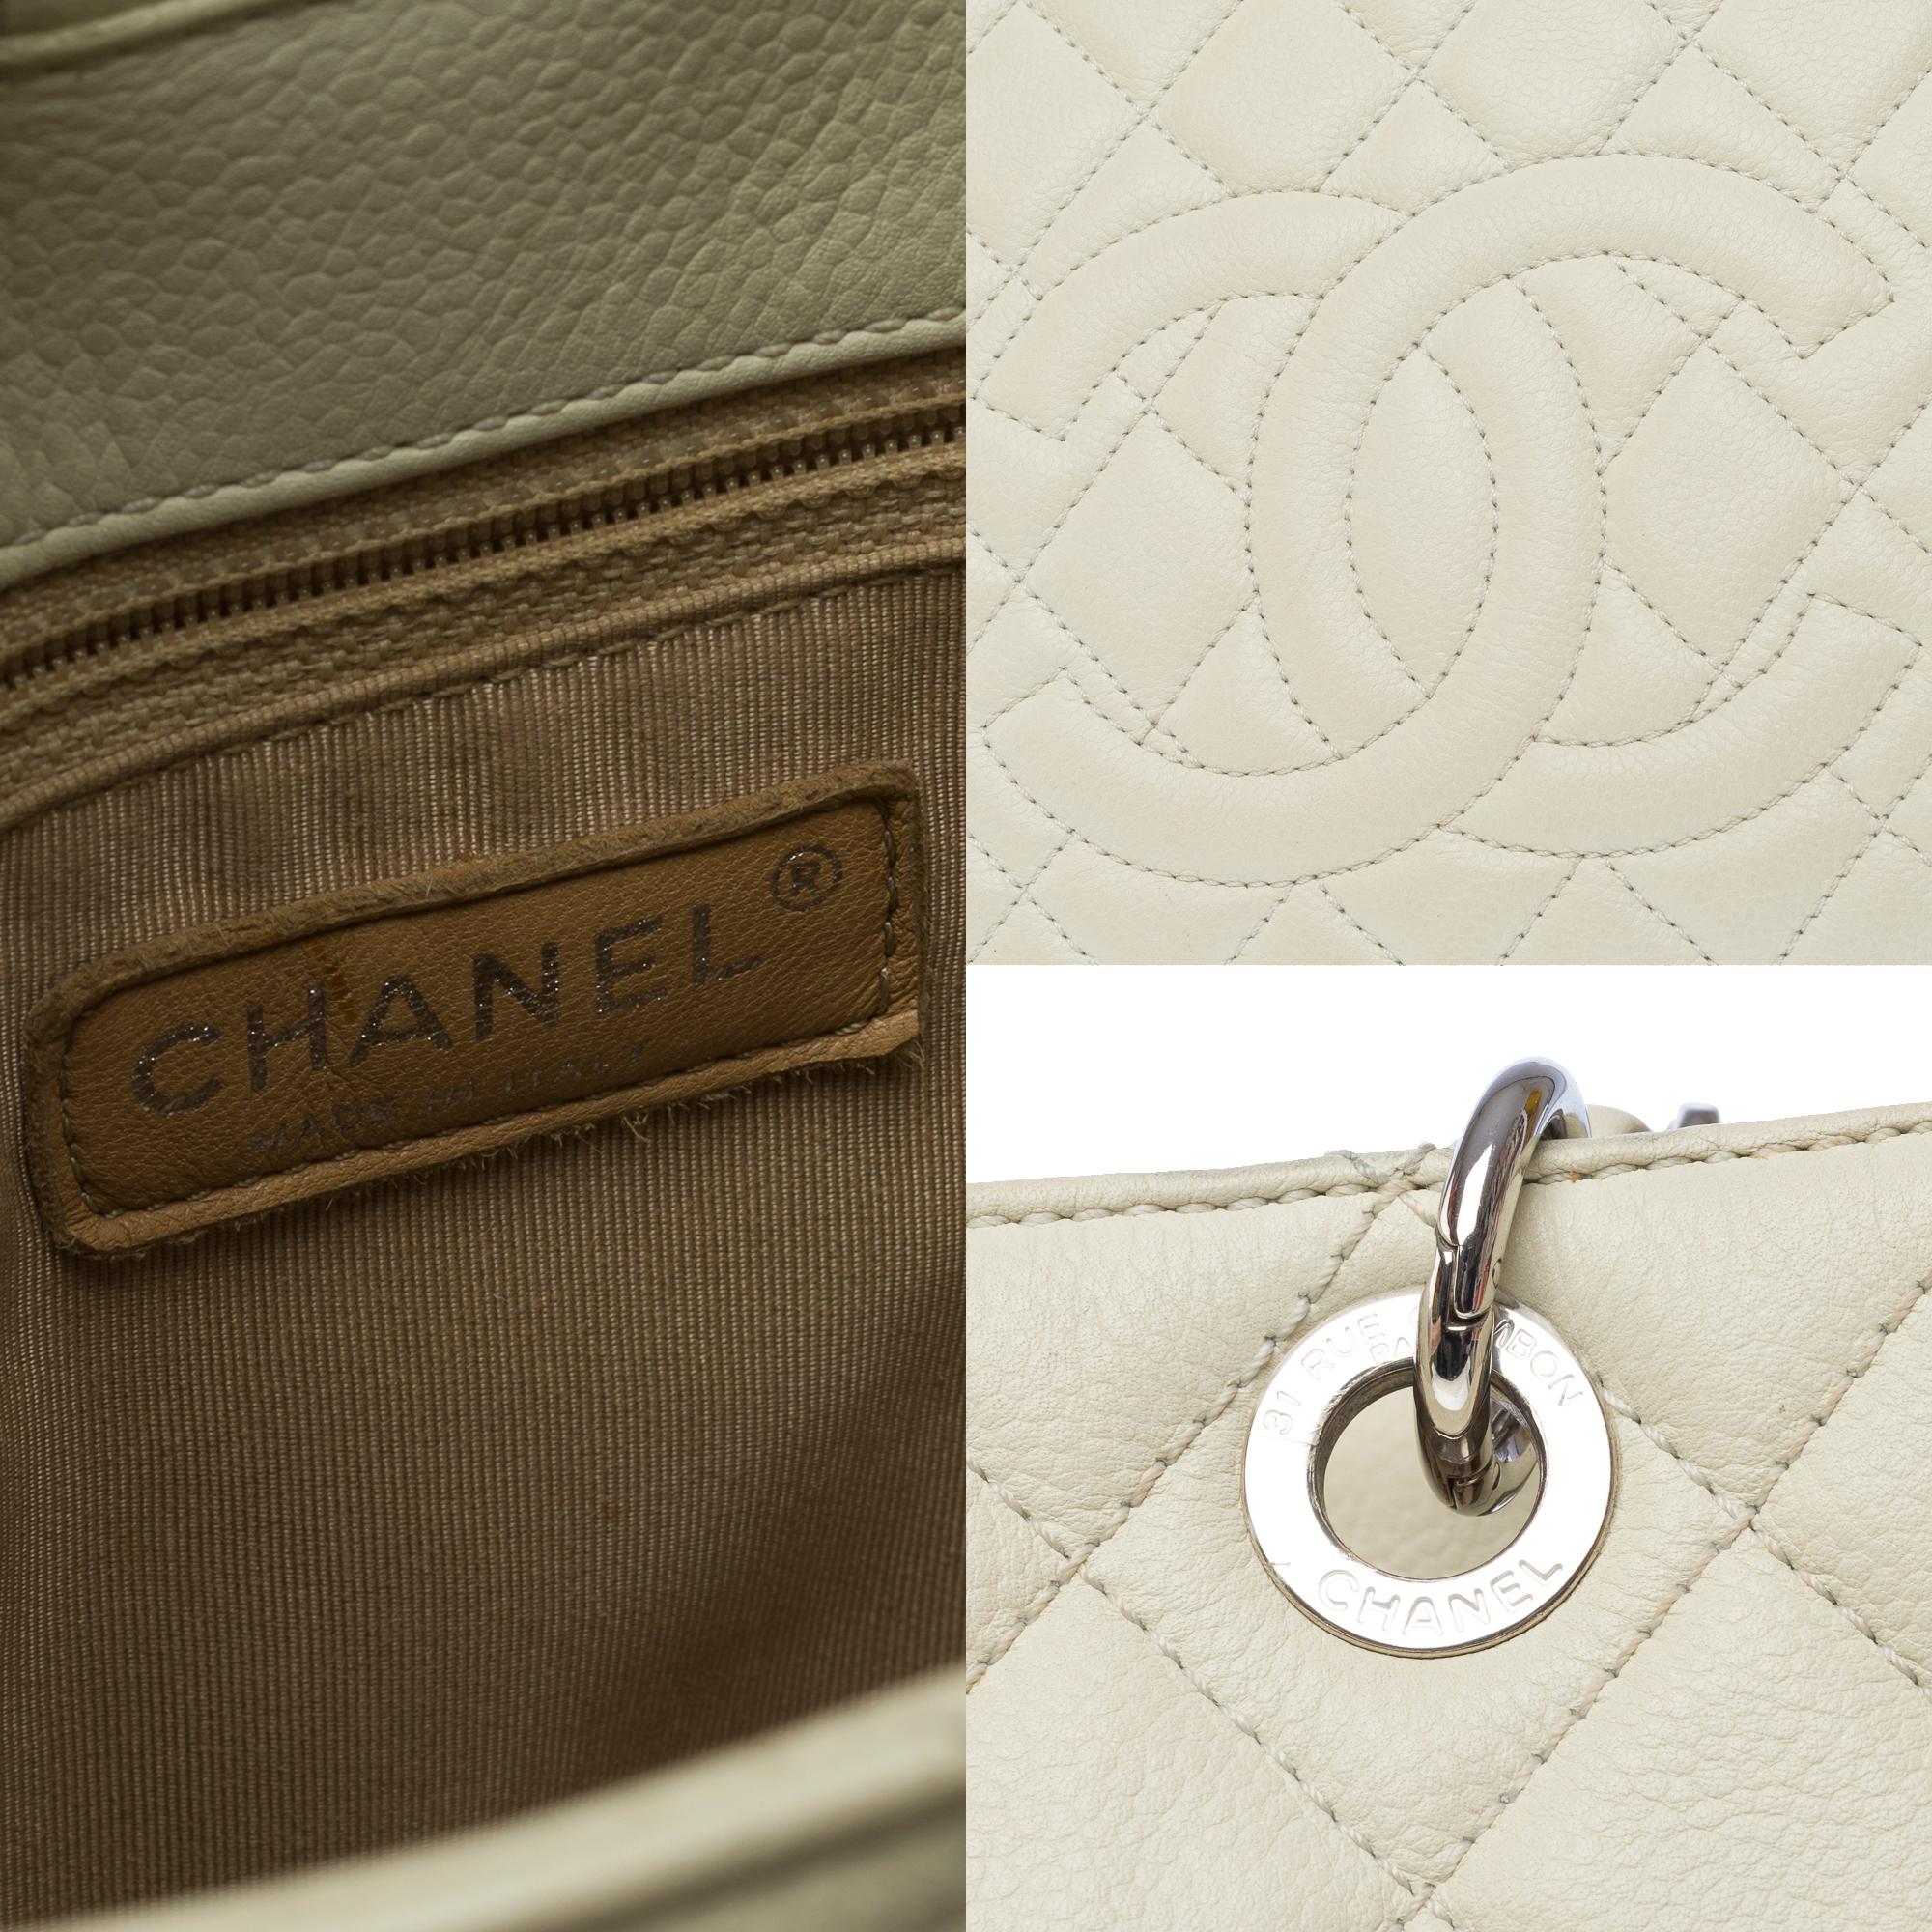  Chanel Petit Shopping Tote bag (PST) in Off-White Caviar quilted leather, SHW For Sale 3